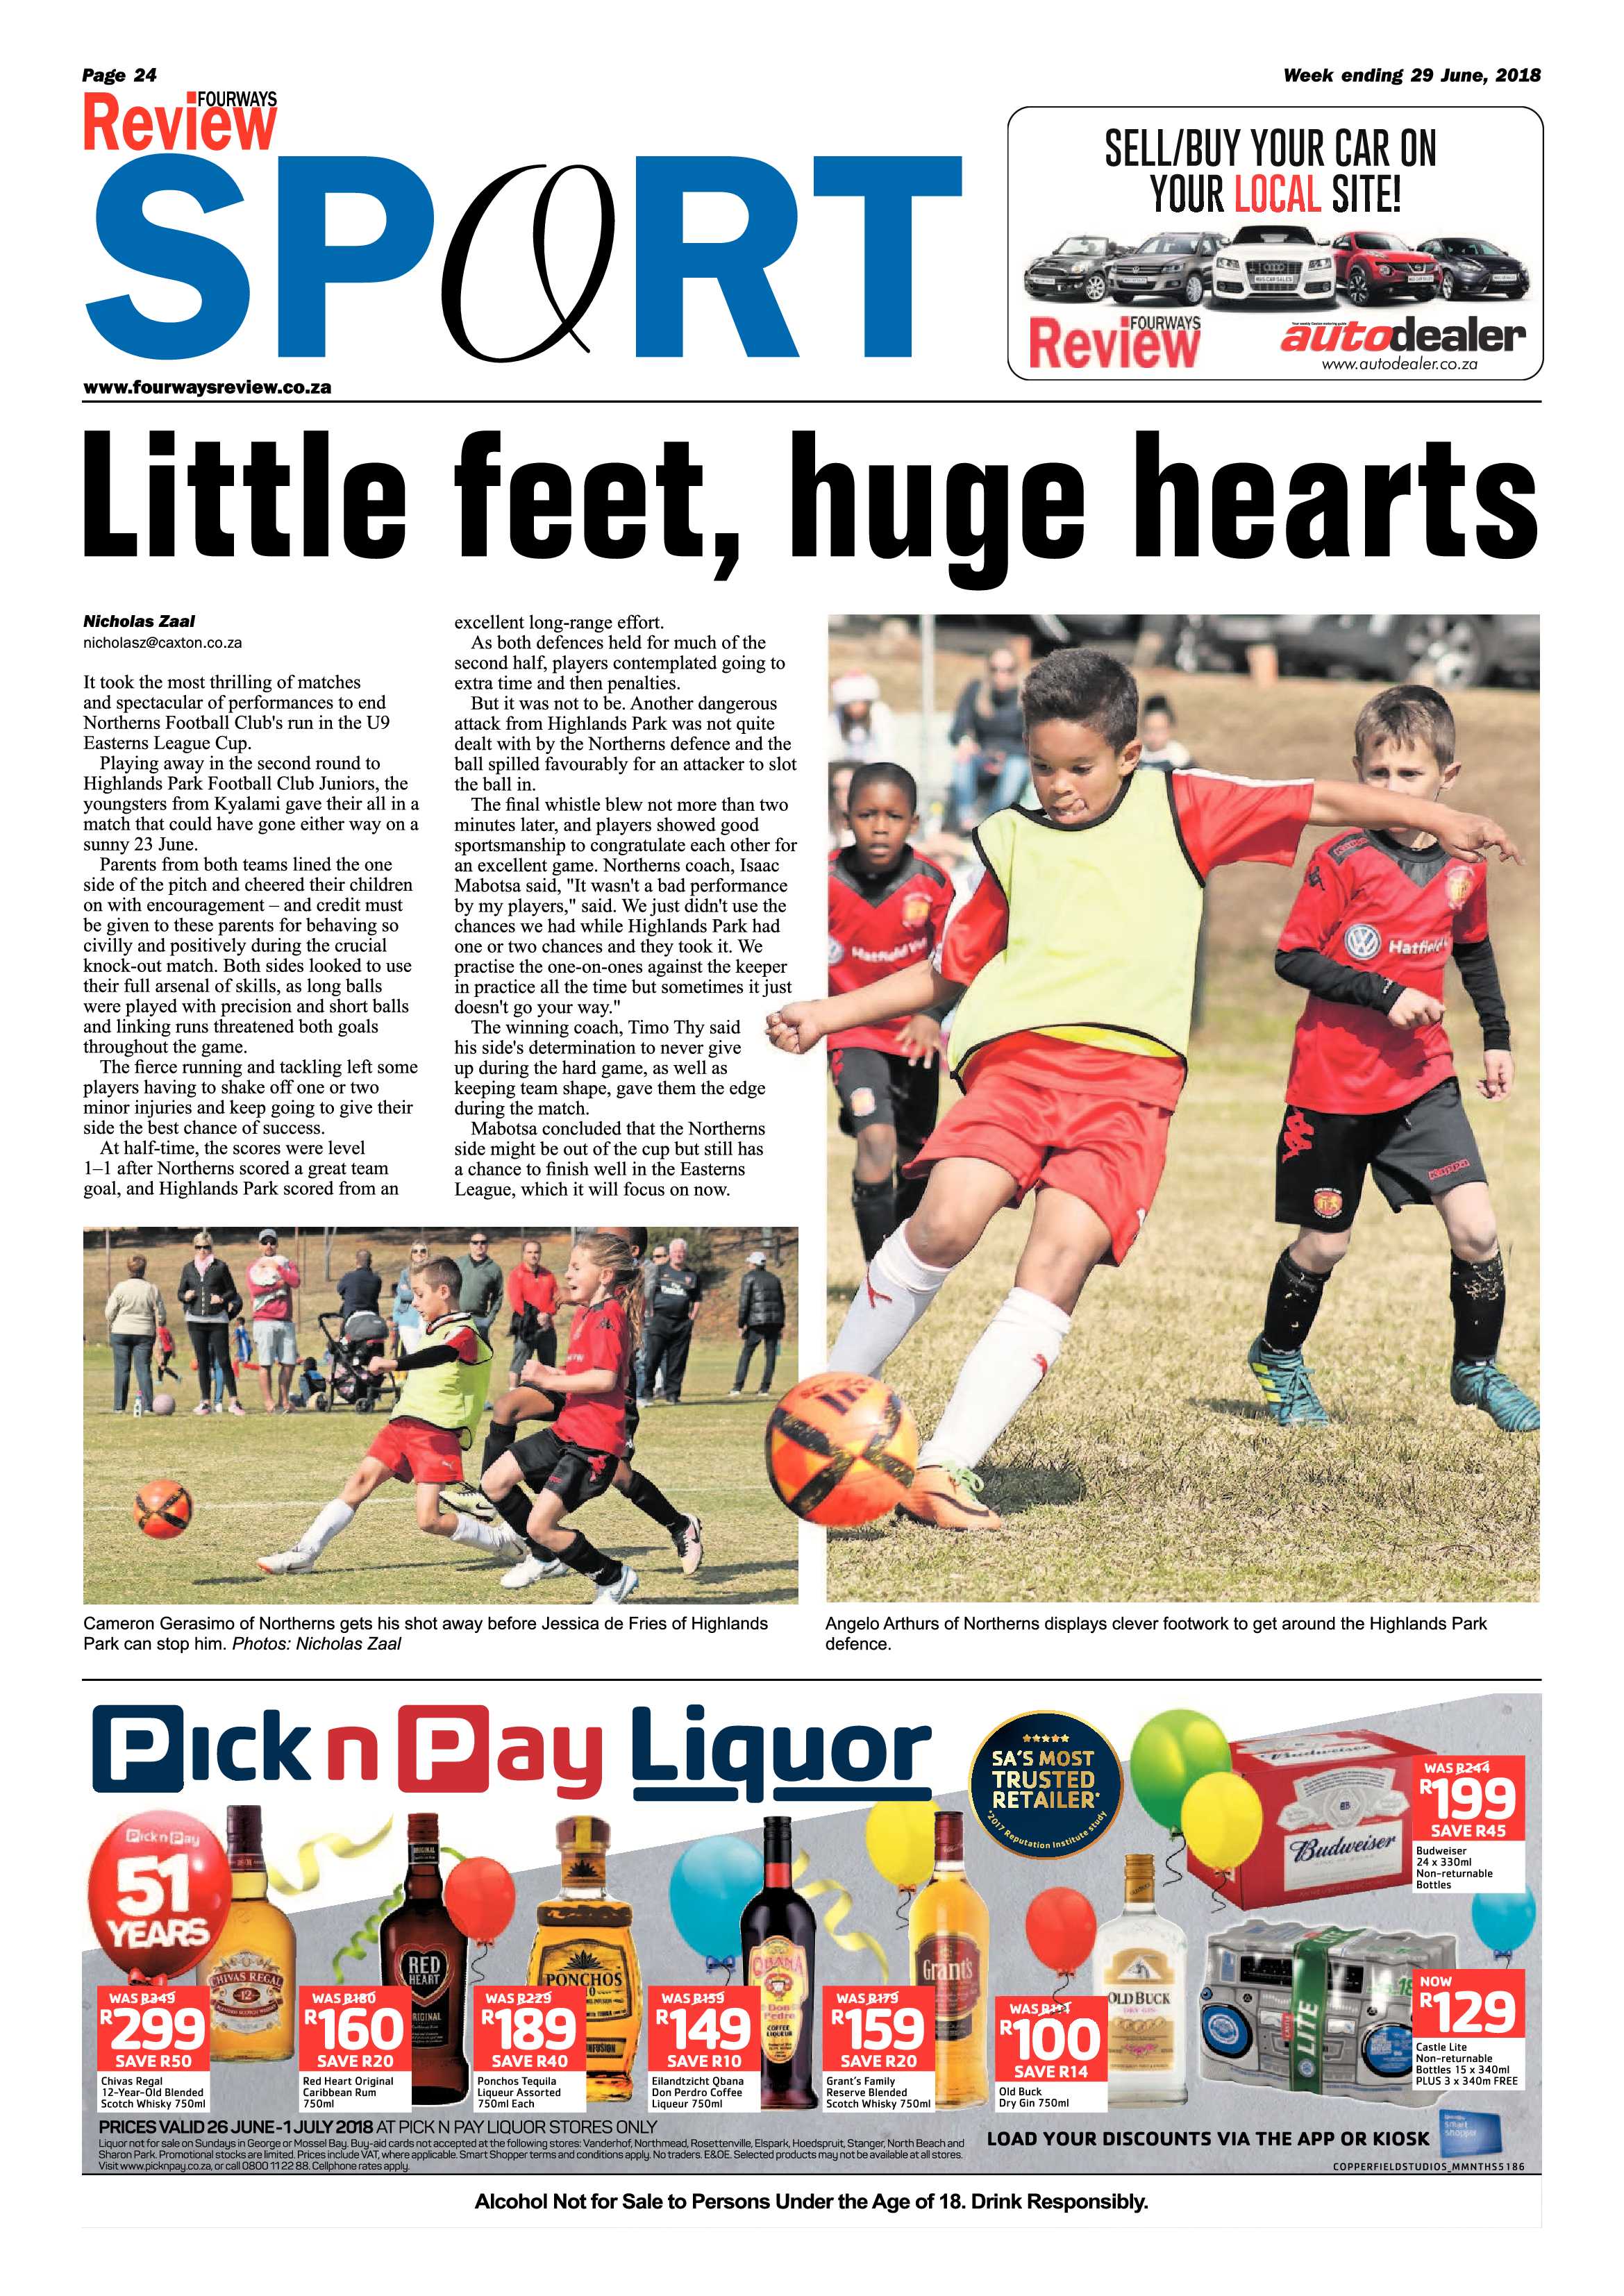 Fourways Review 29 June, 2018 page 24